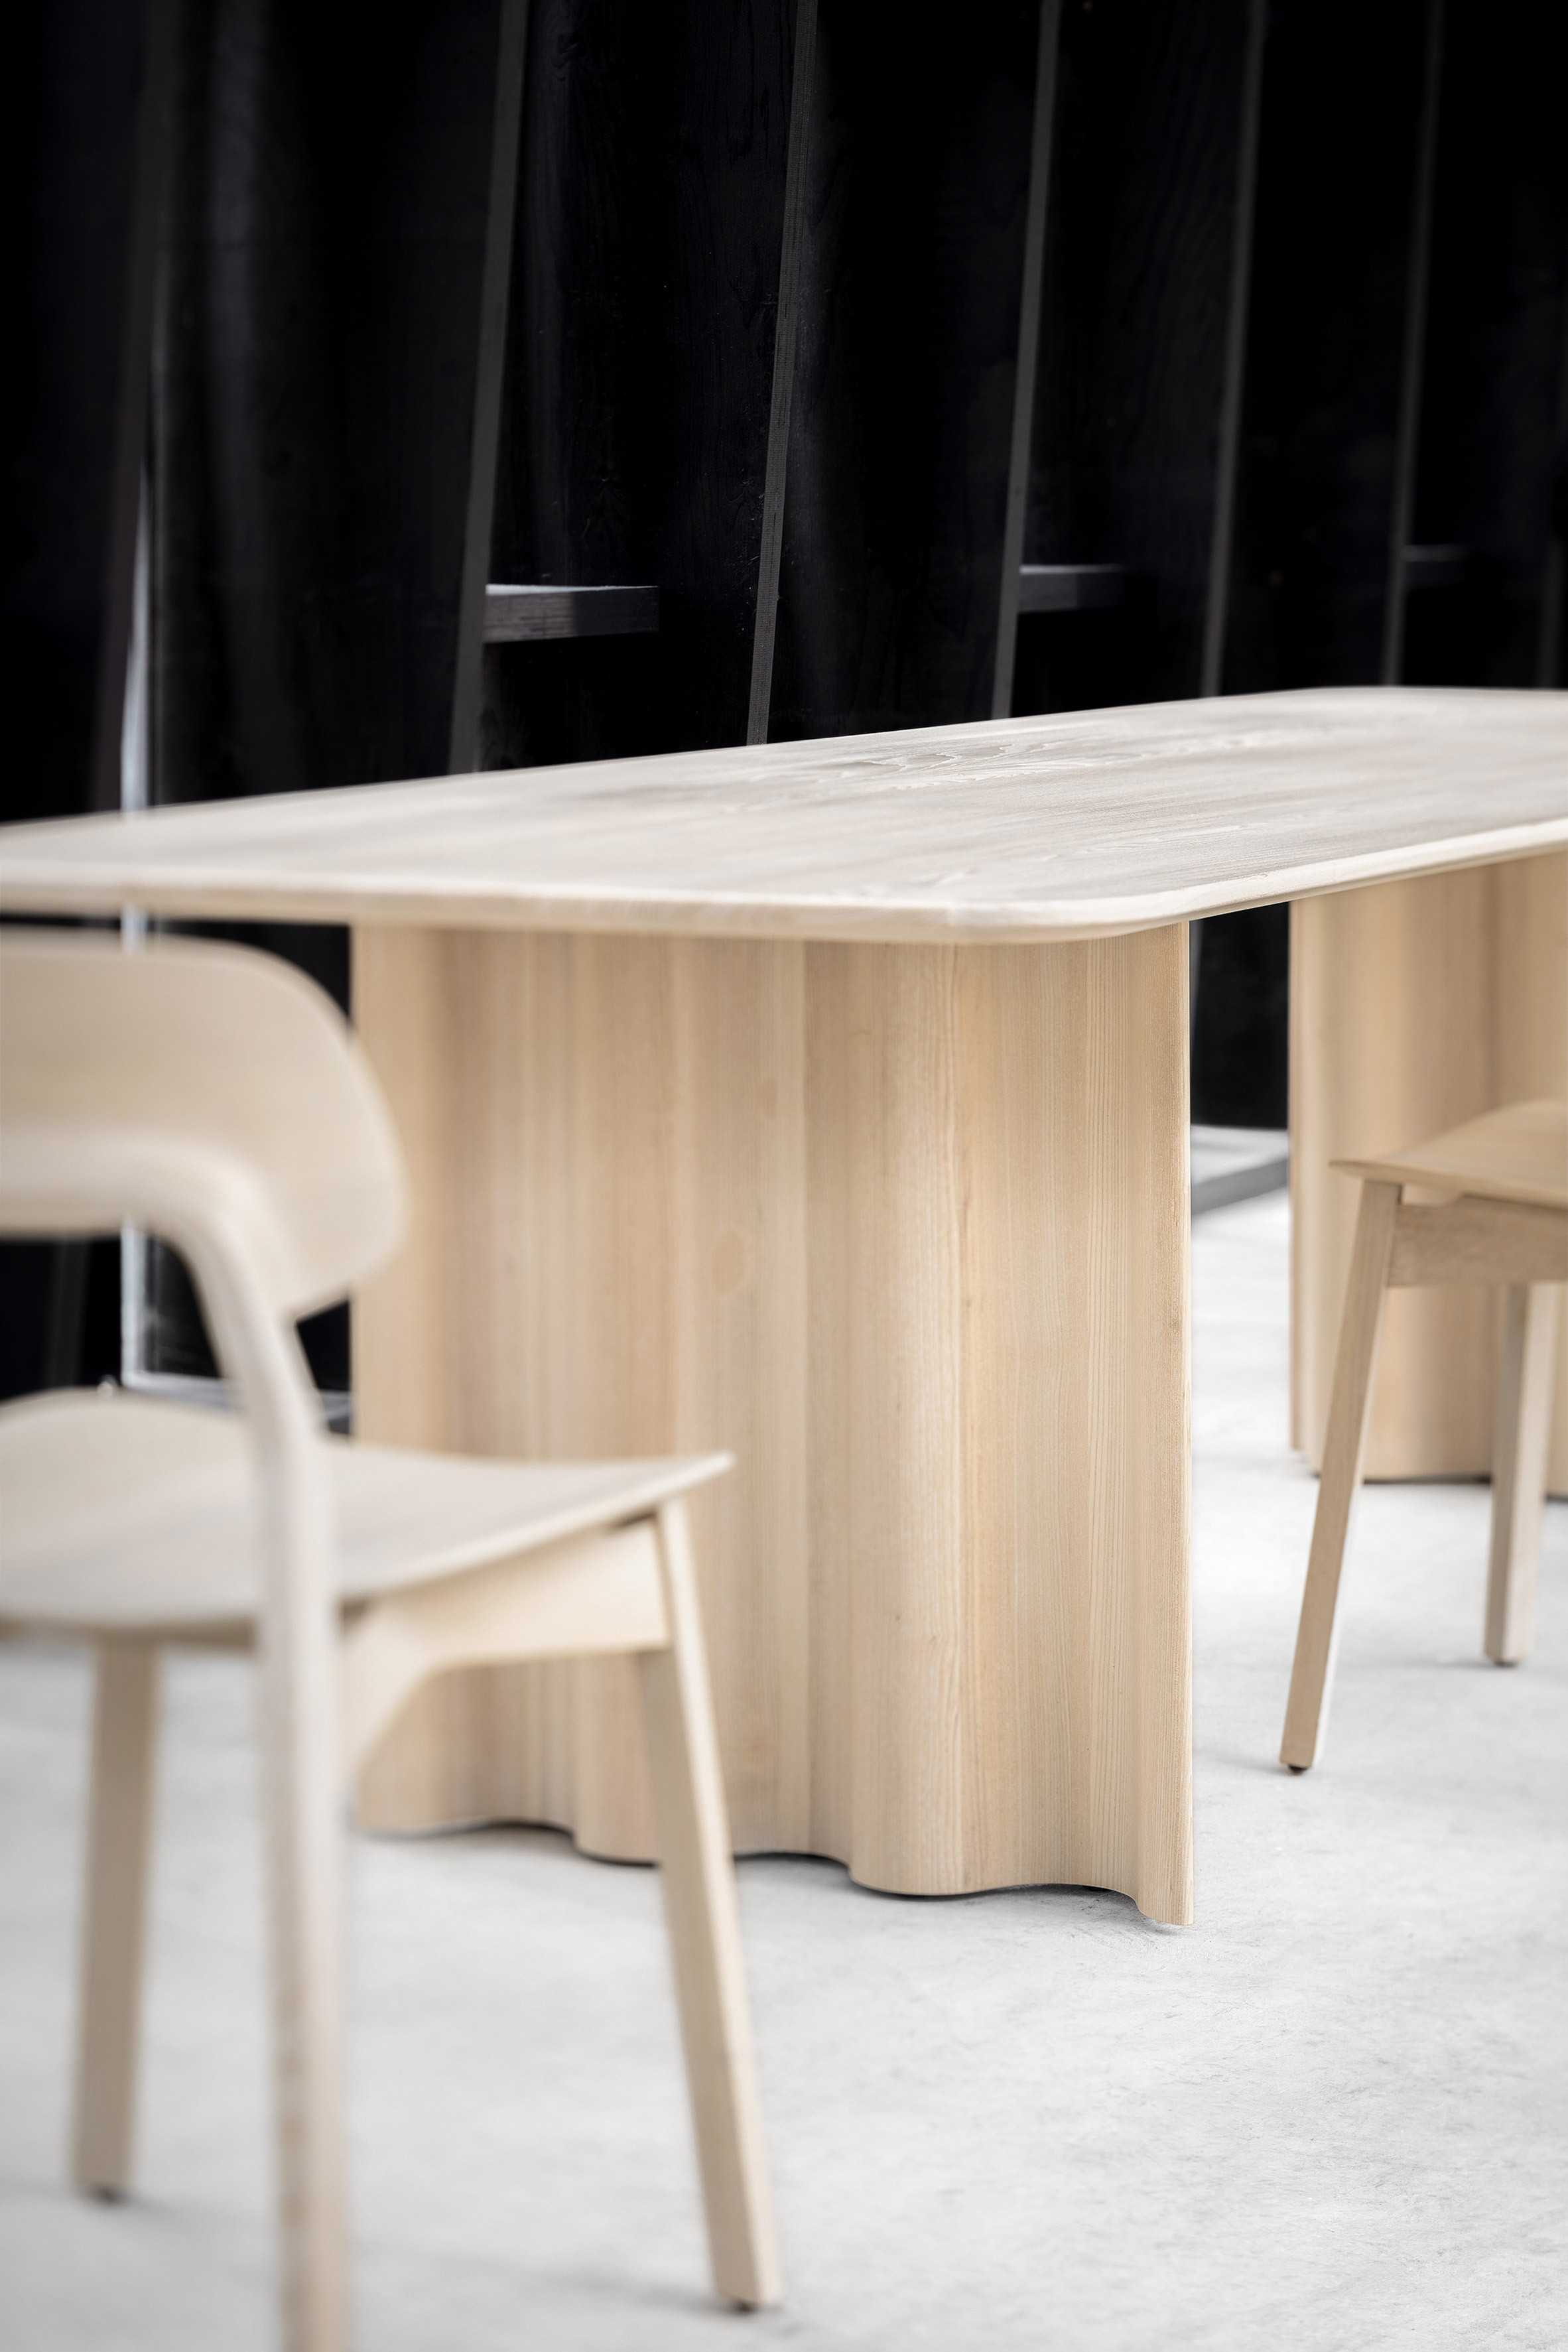 Läufer & Keichel design table with ribbon-like legs for Zeitraum